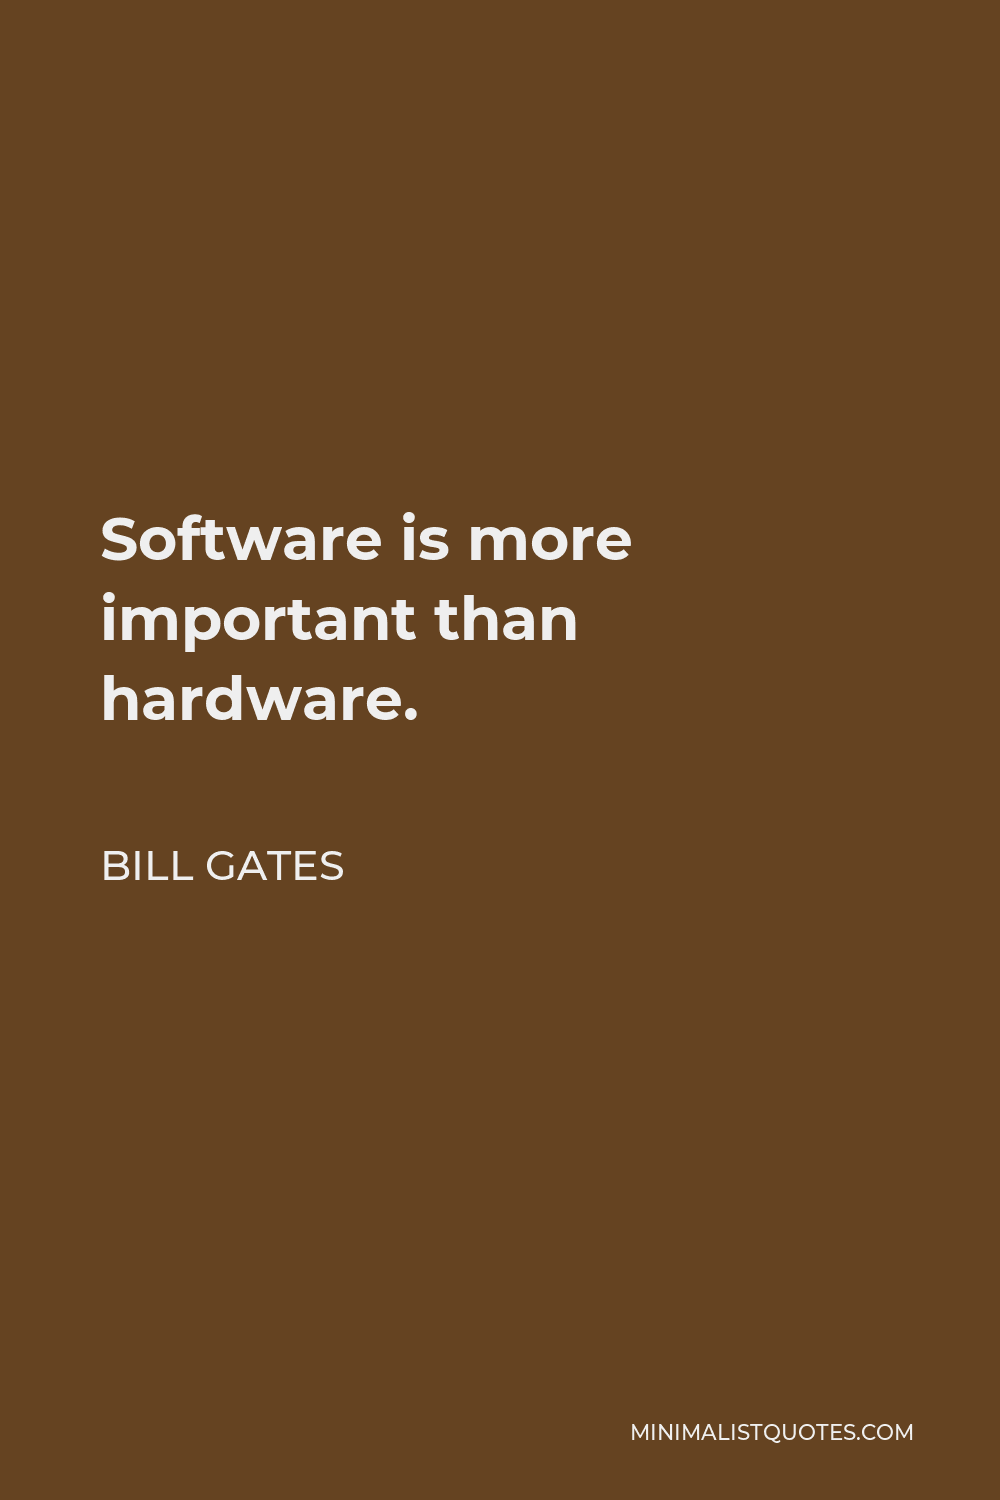 Bill Gates Quote - Software is more important than hardware.